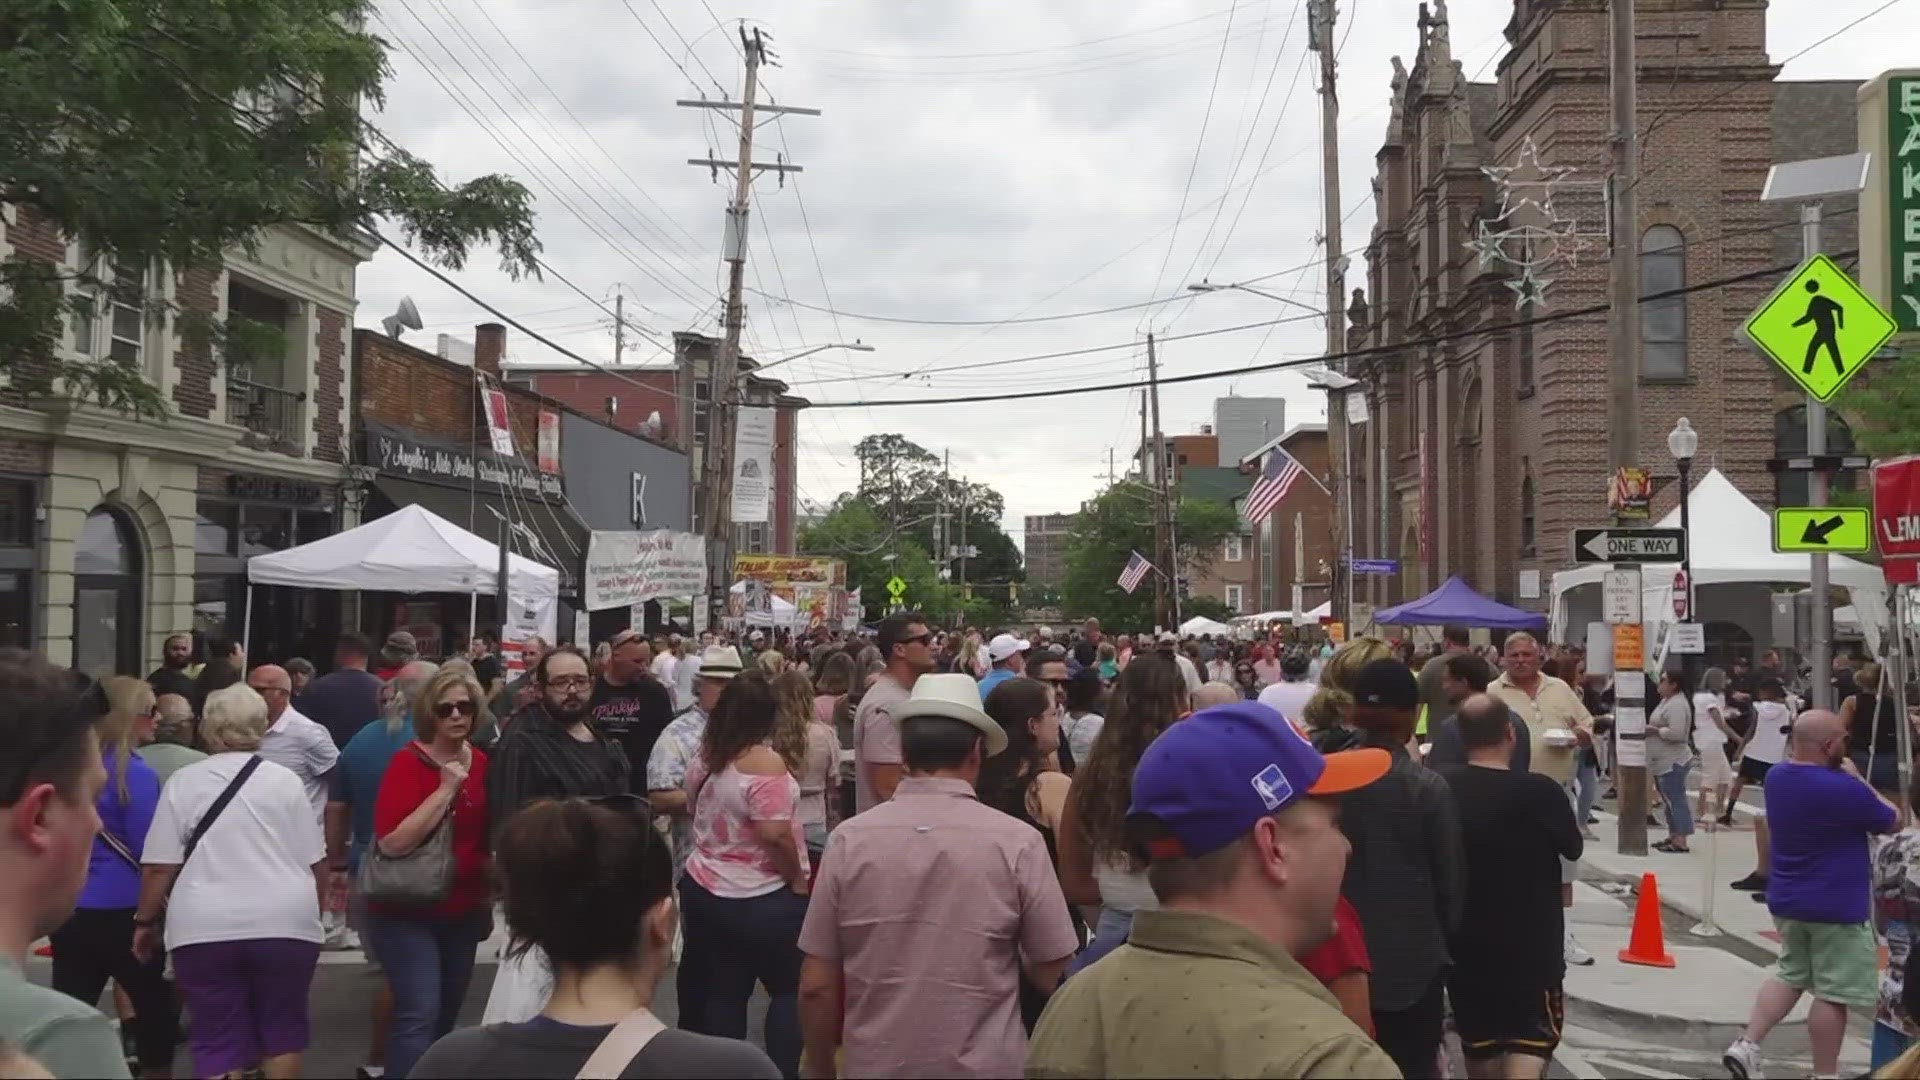 The Feast is returning this weekend for its 124th year to Cleveland's Little Italy neighborhood.